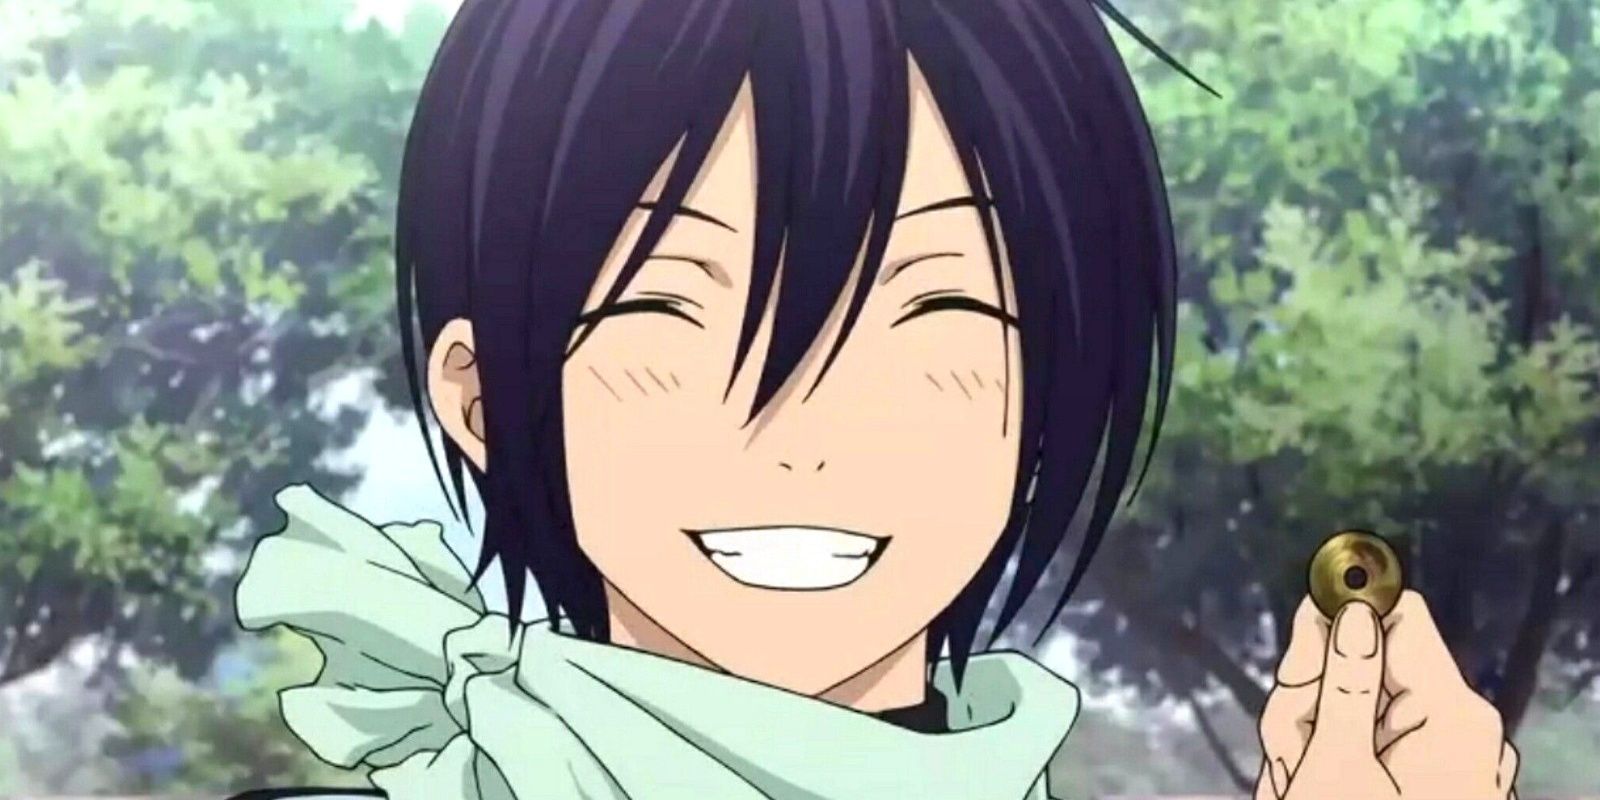 The God Yato from Noragami is Pictured